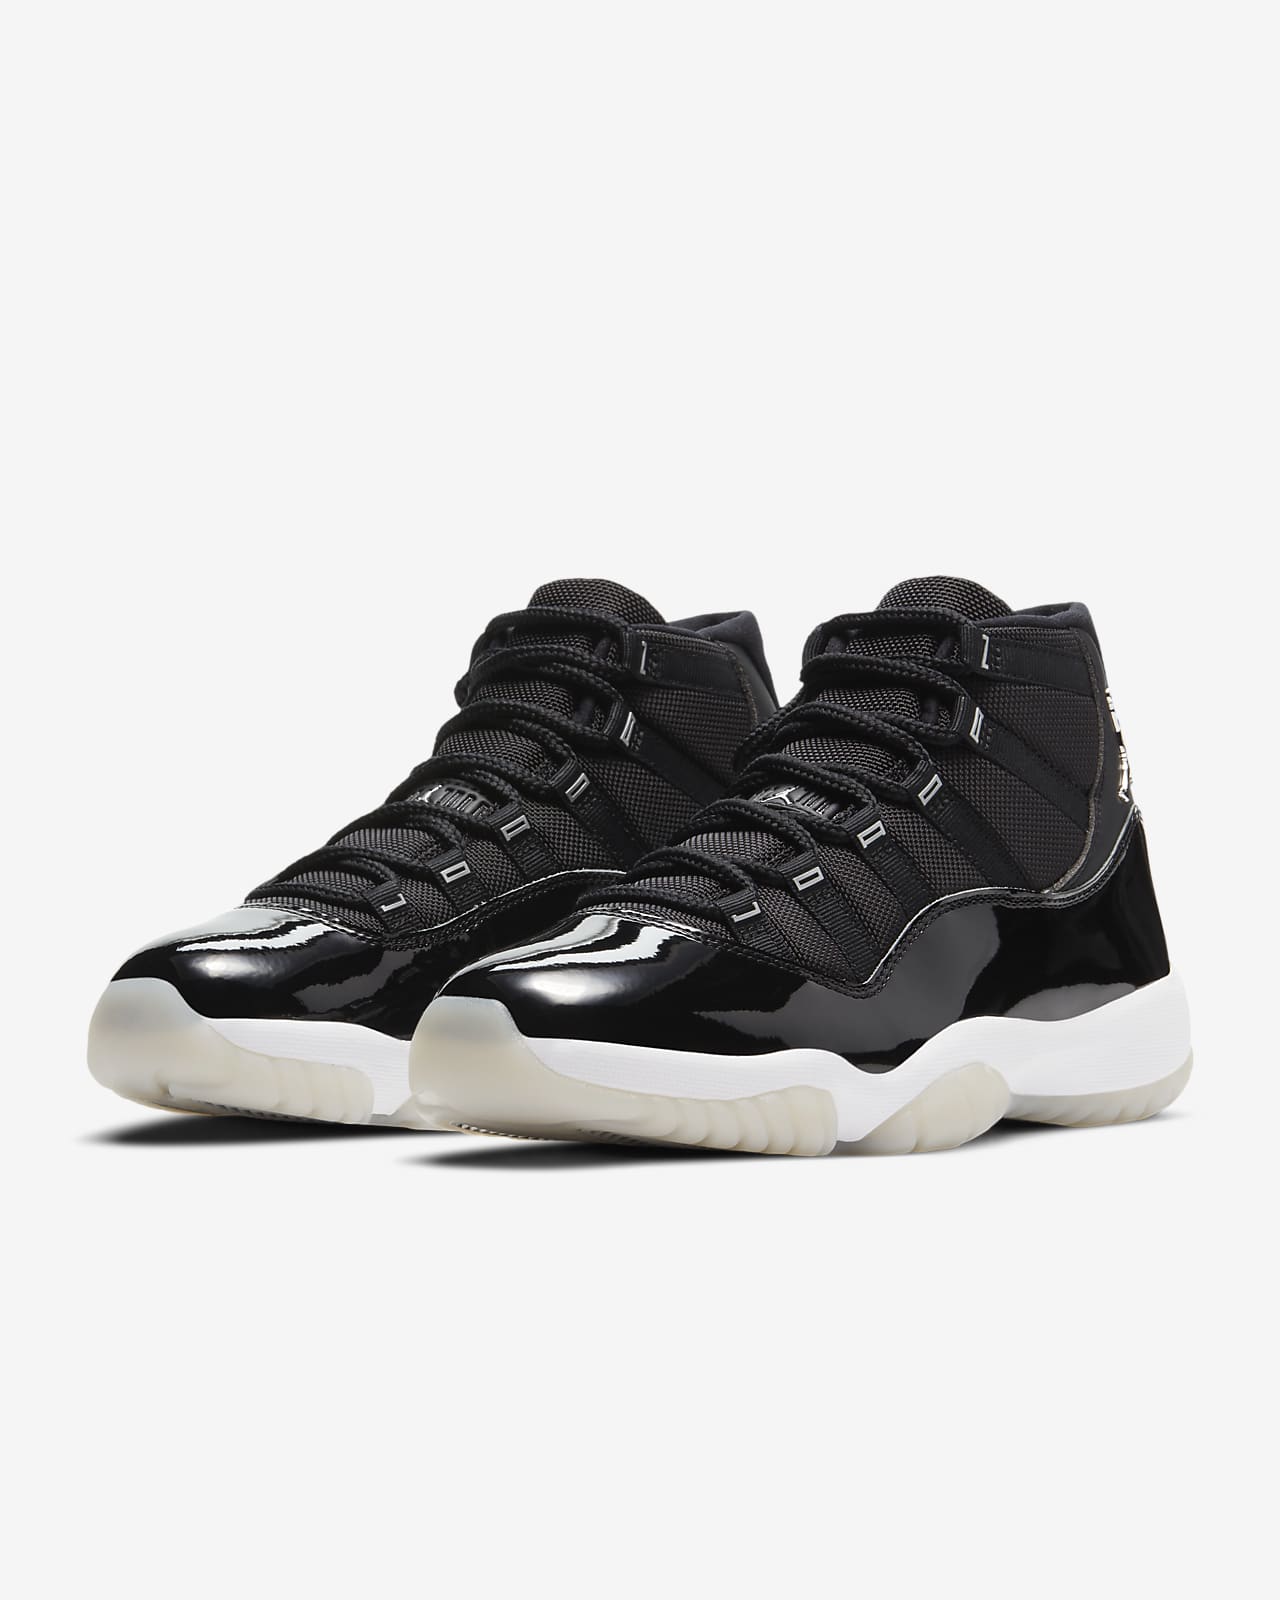 where can i find the jordan 11